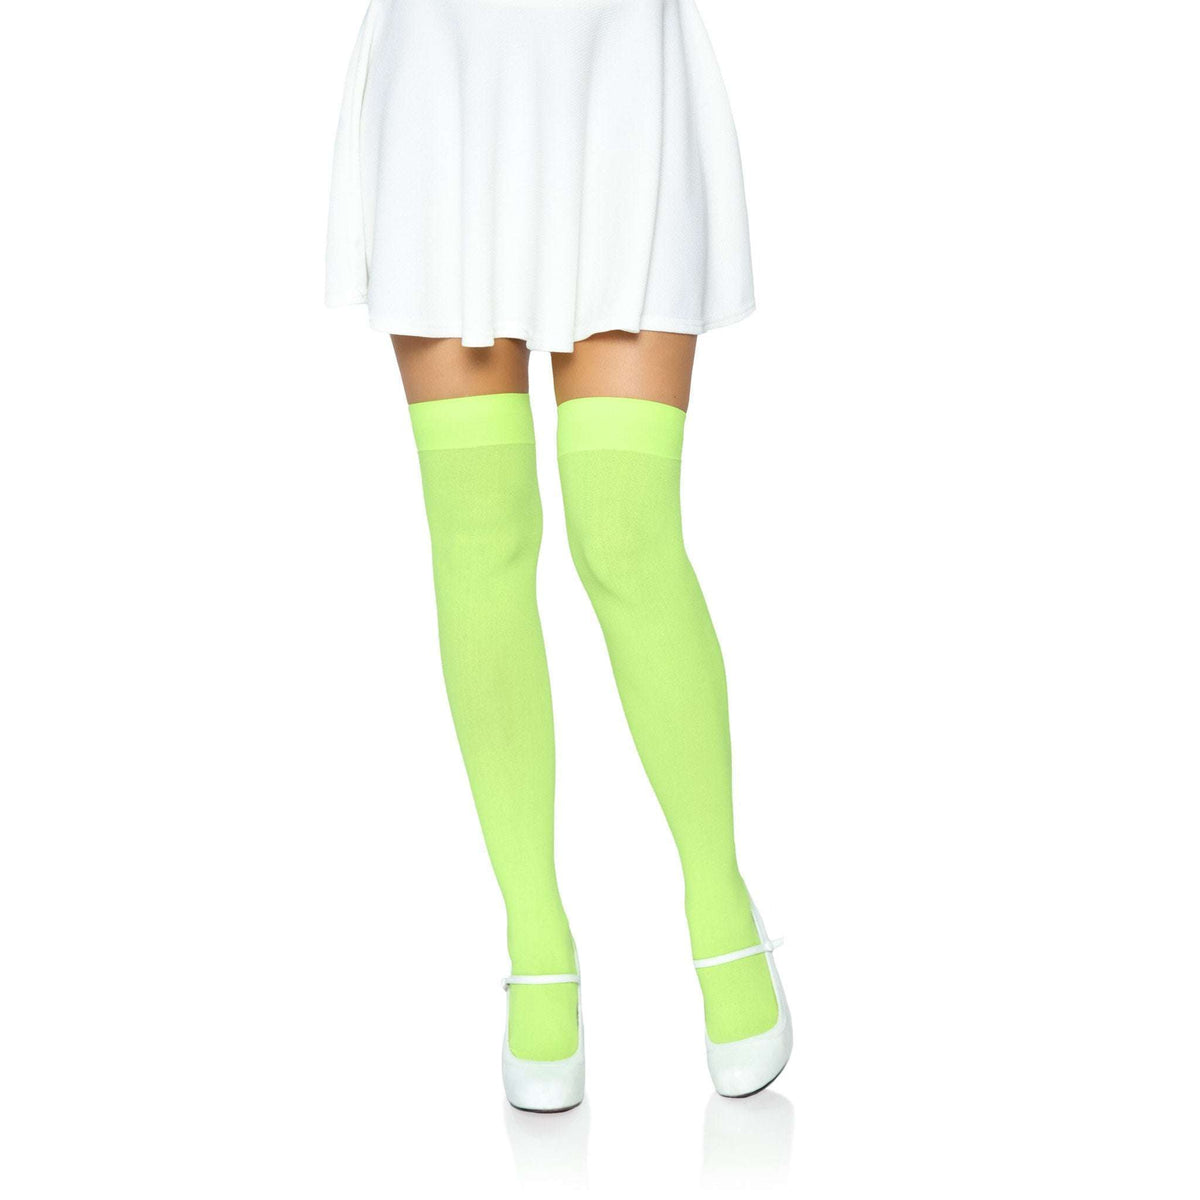 Neon Opaque Nylon Thigh High Adult Stockings